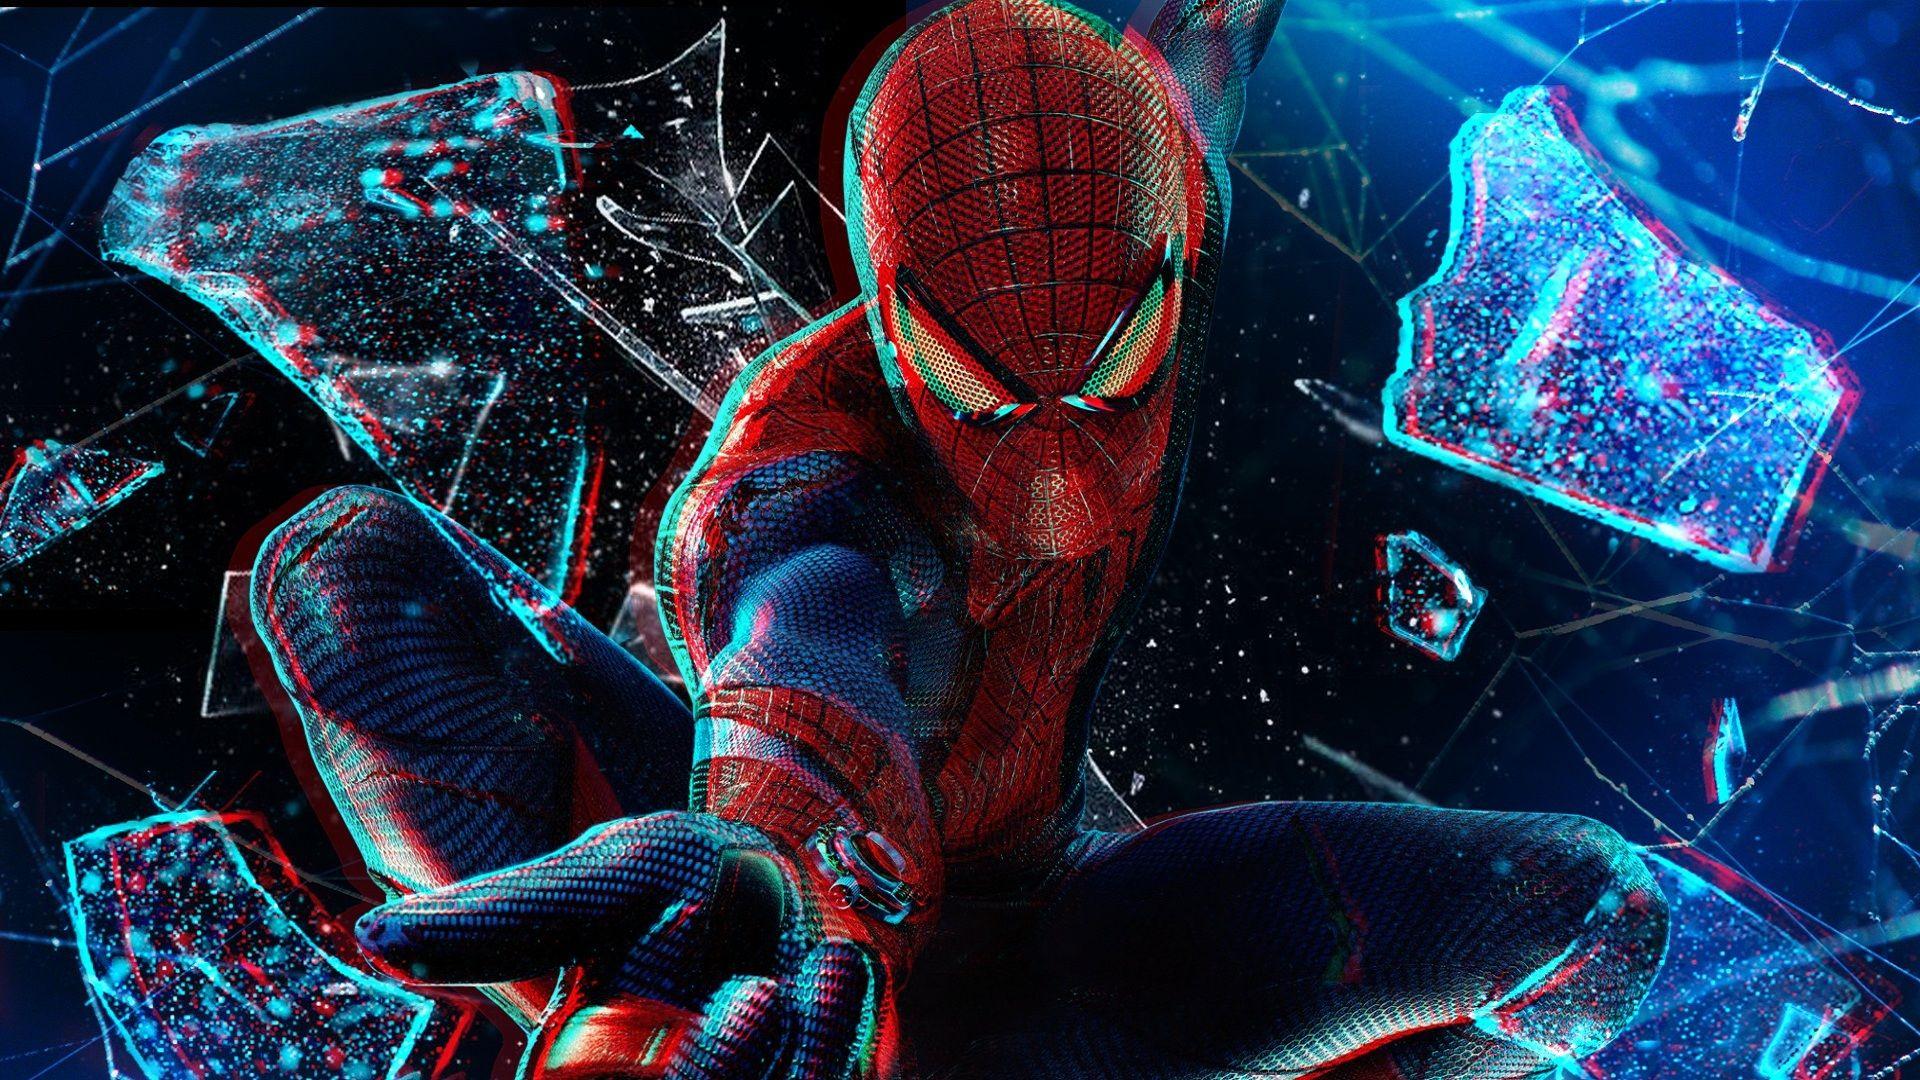 Wallpaper.wiki Spiderman 4 Android Image 1 PIC WPD0014319